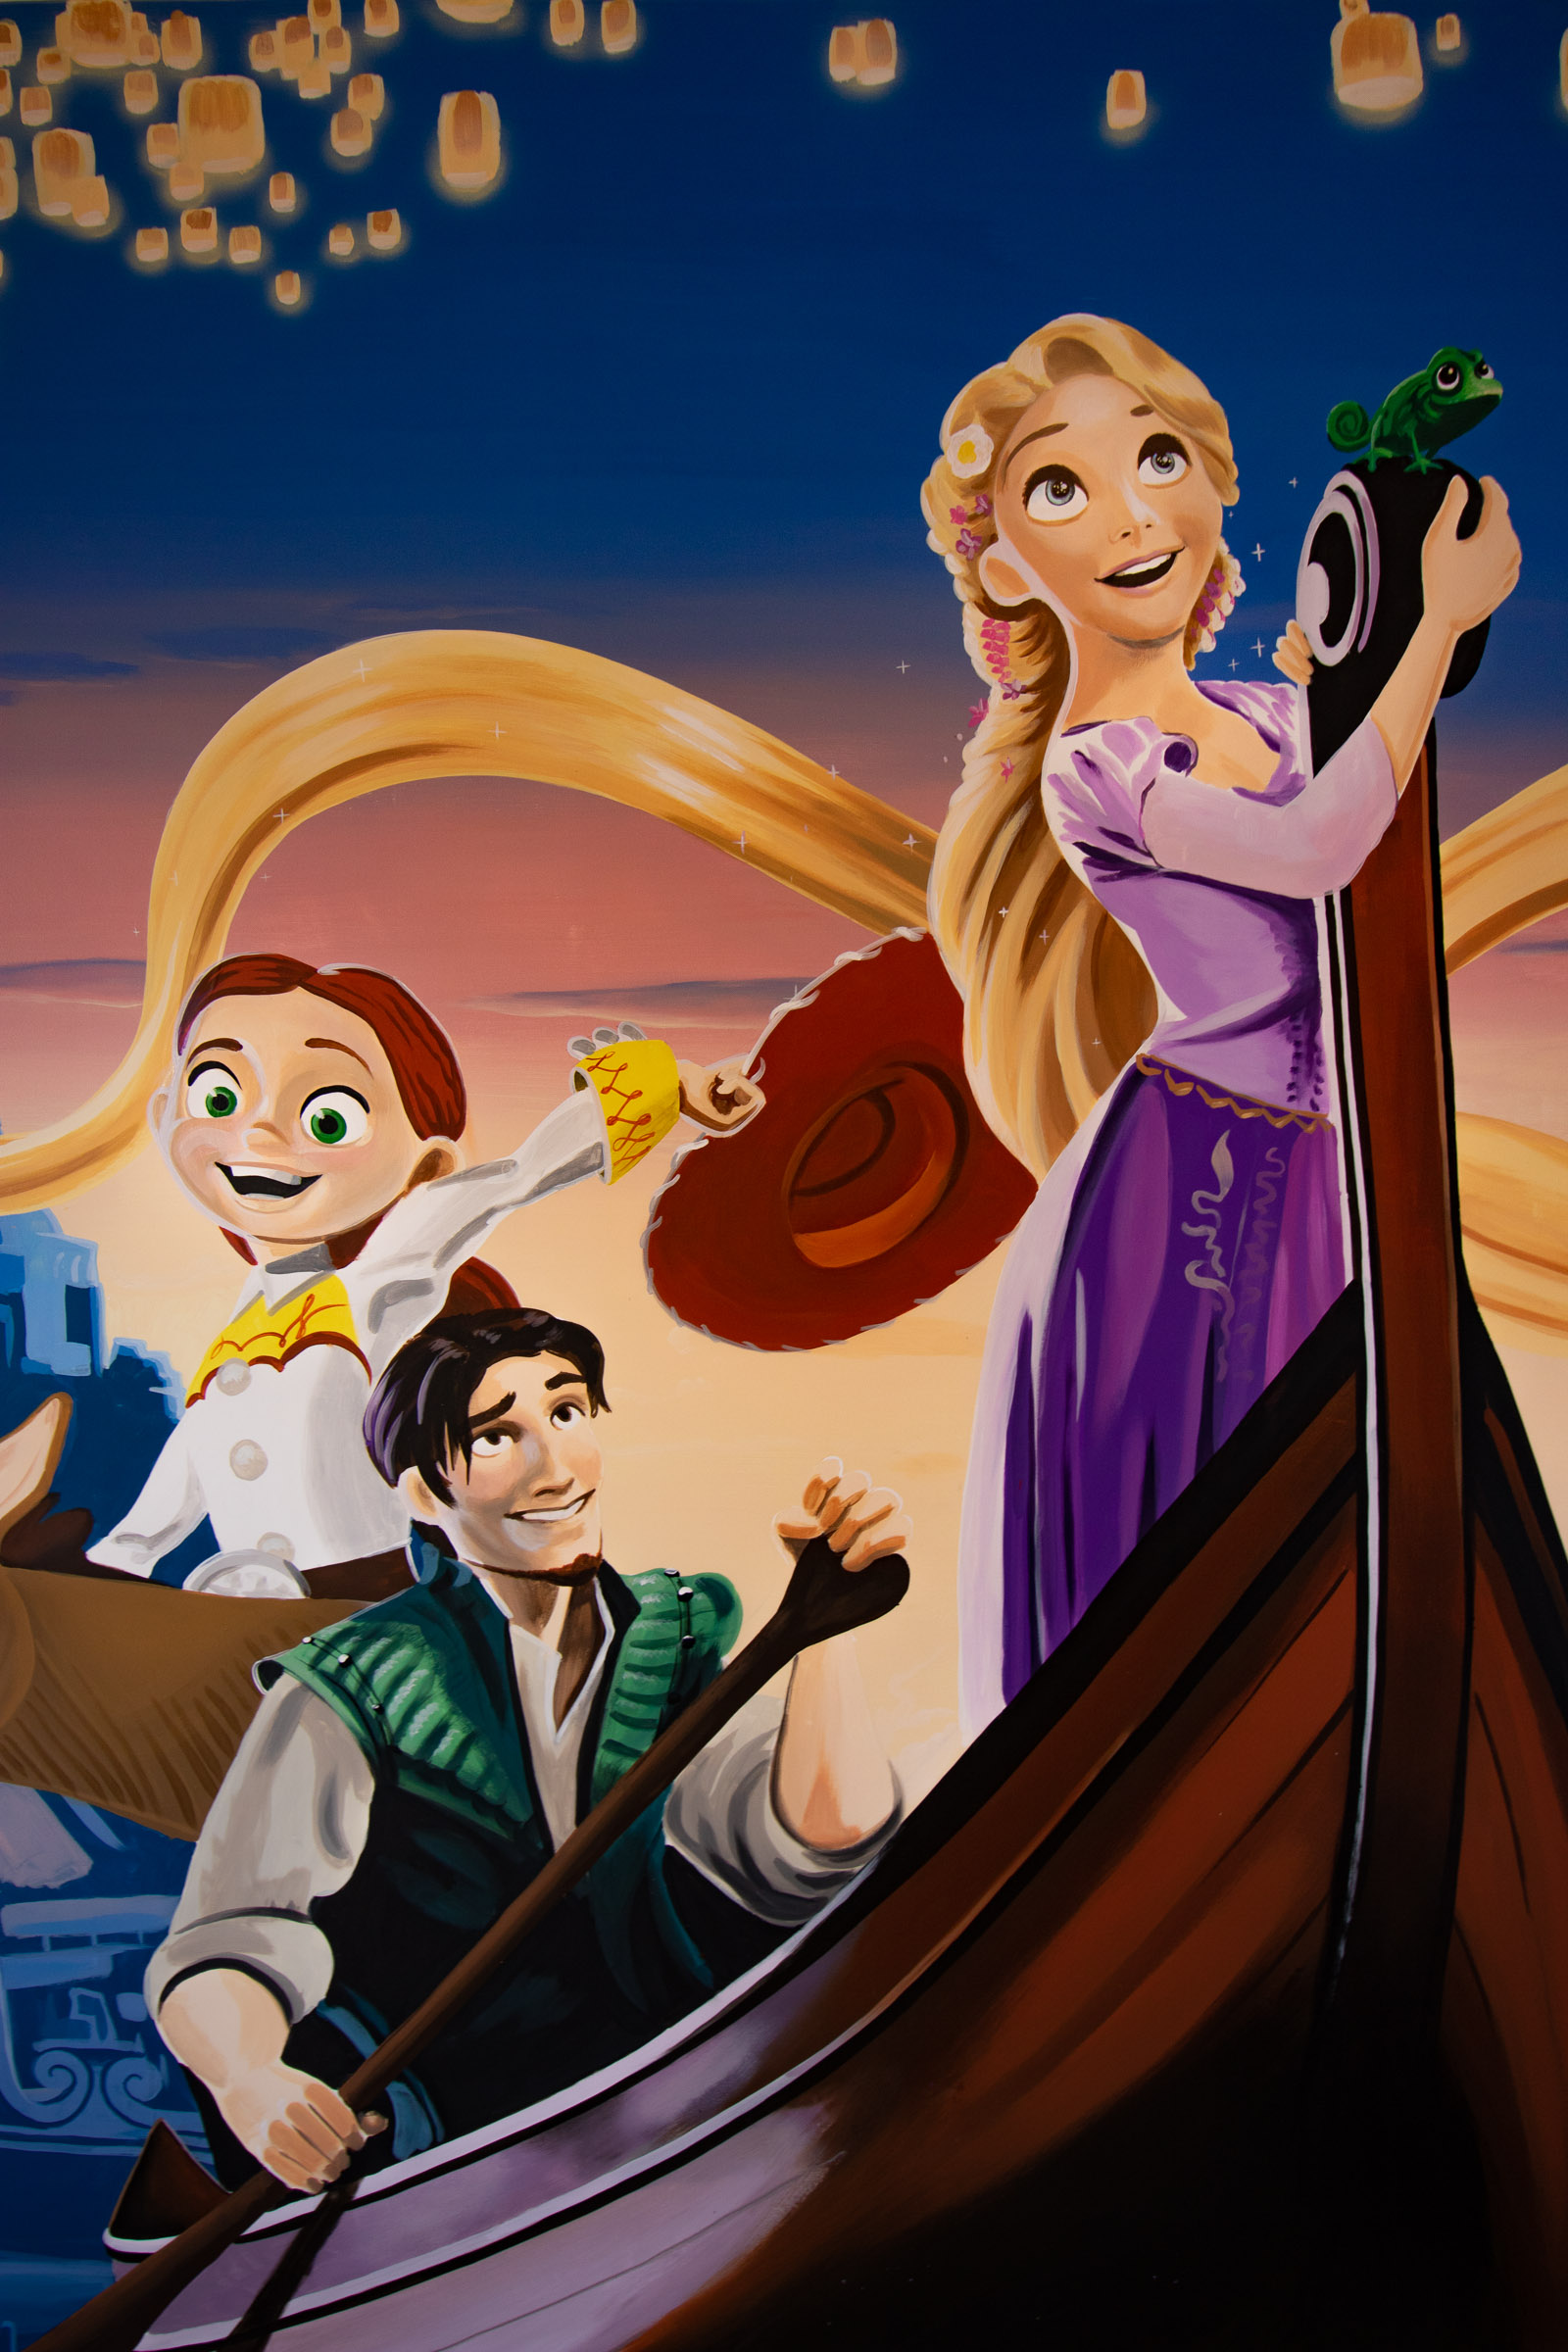 Disney characters Rapunzel, Flynn Rider and Jessie from Toy Story appear in this Tangled themed mural